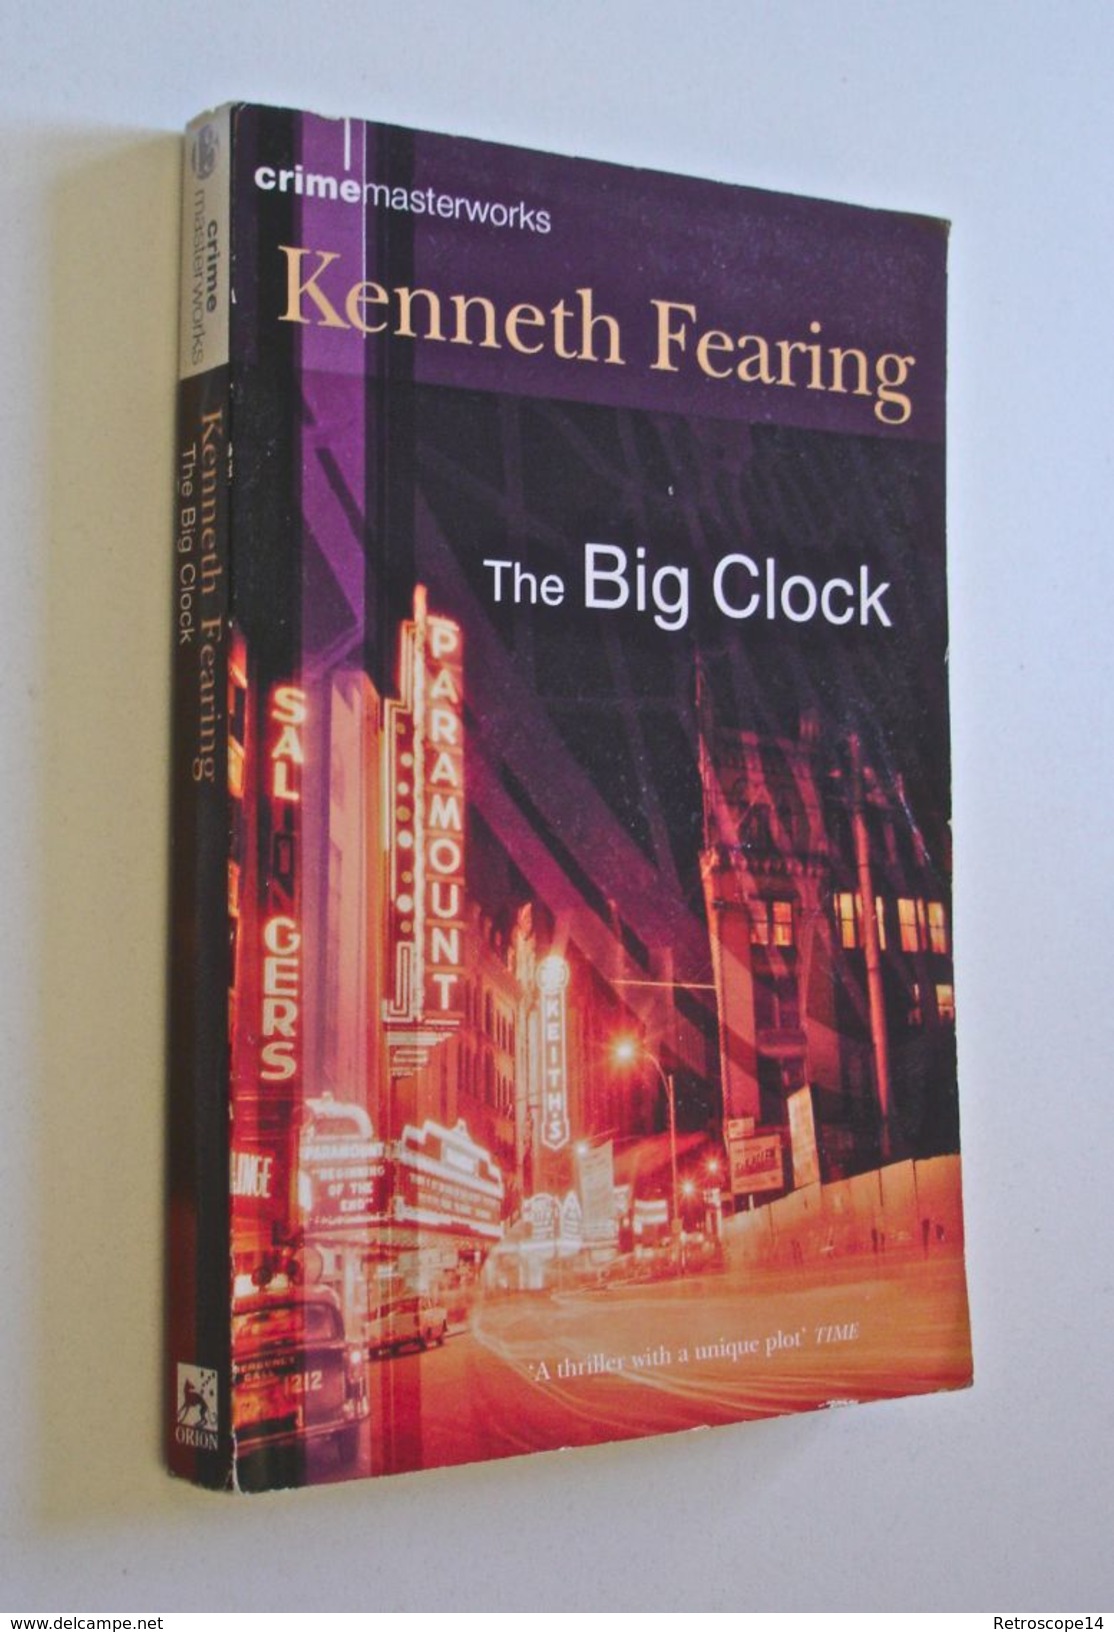 KENNETH FEARING, THE BIG CLOCK, Orion. - Gialli